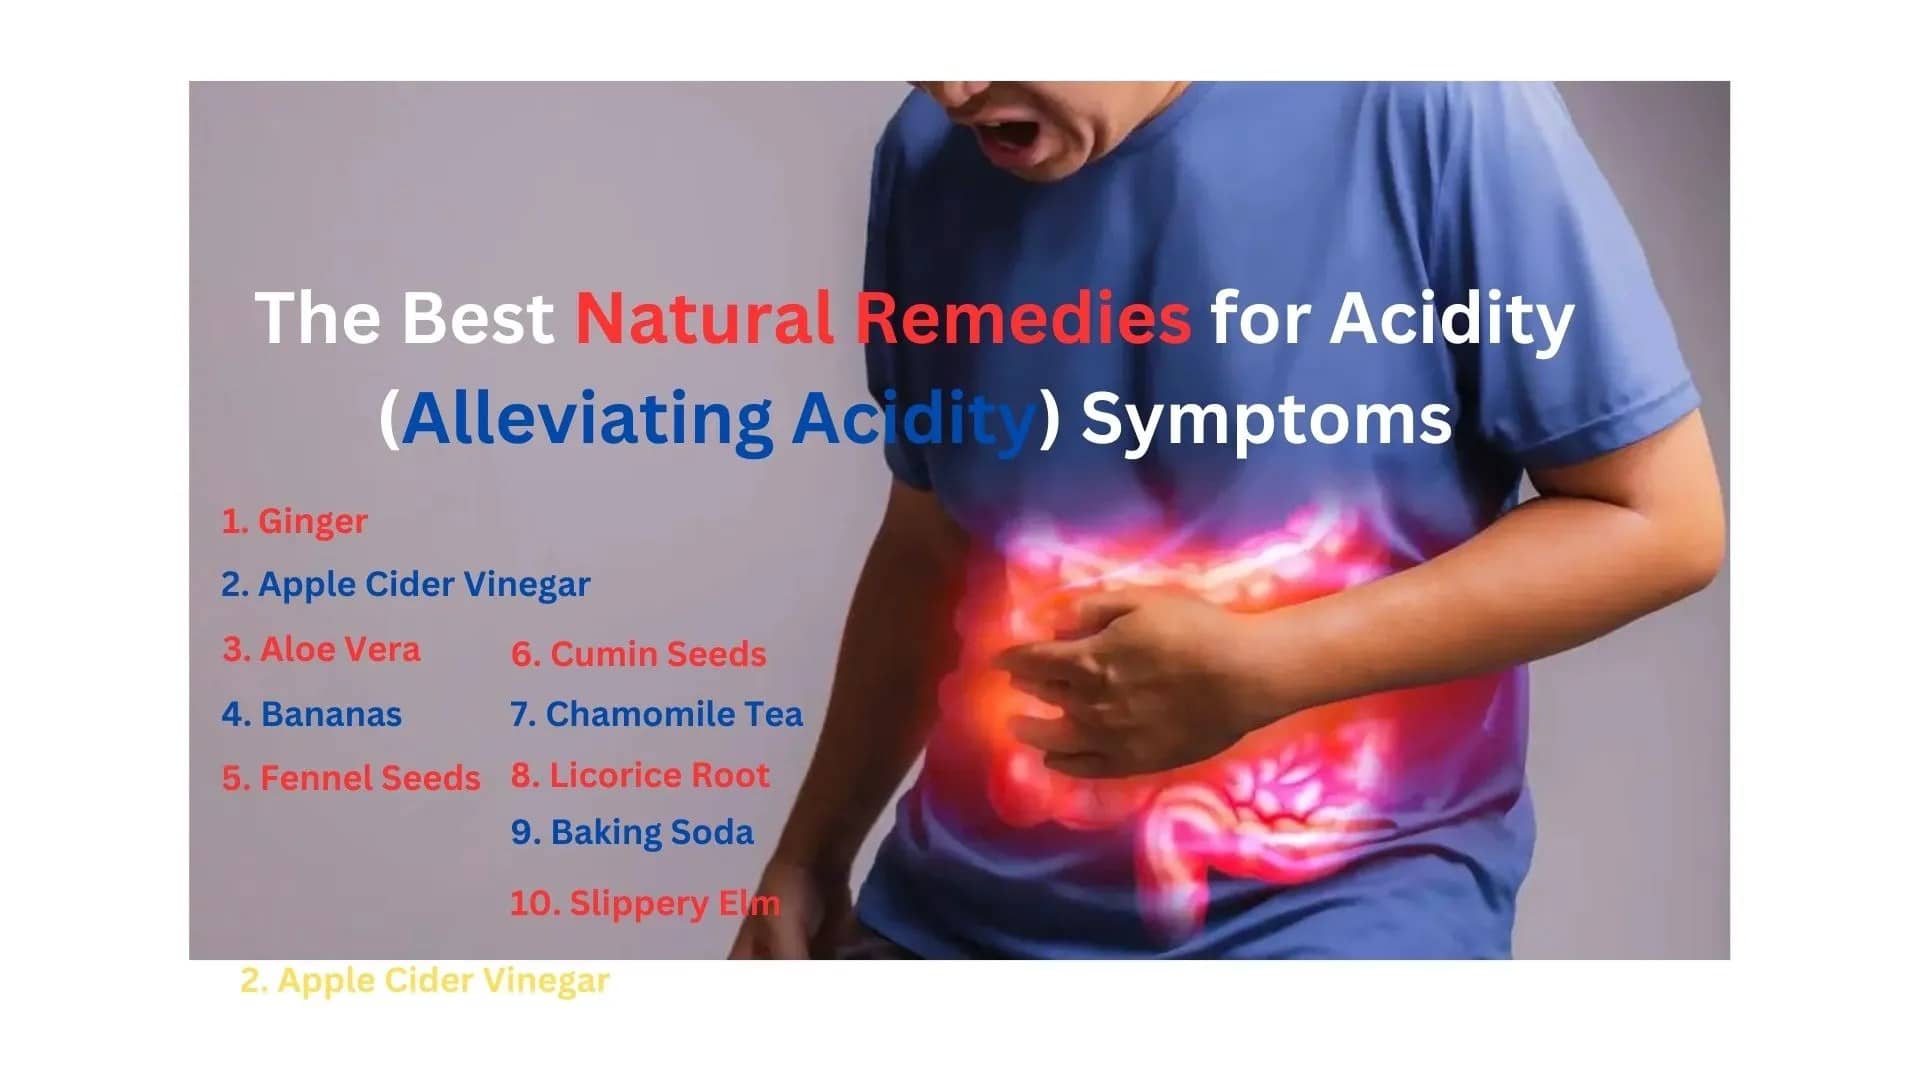 The Best Natural Remedies for Acidity (Alleviating Acidity) Symptoms